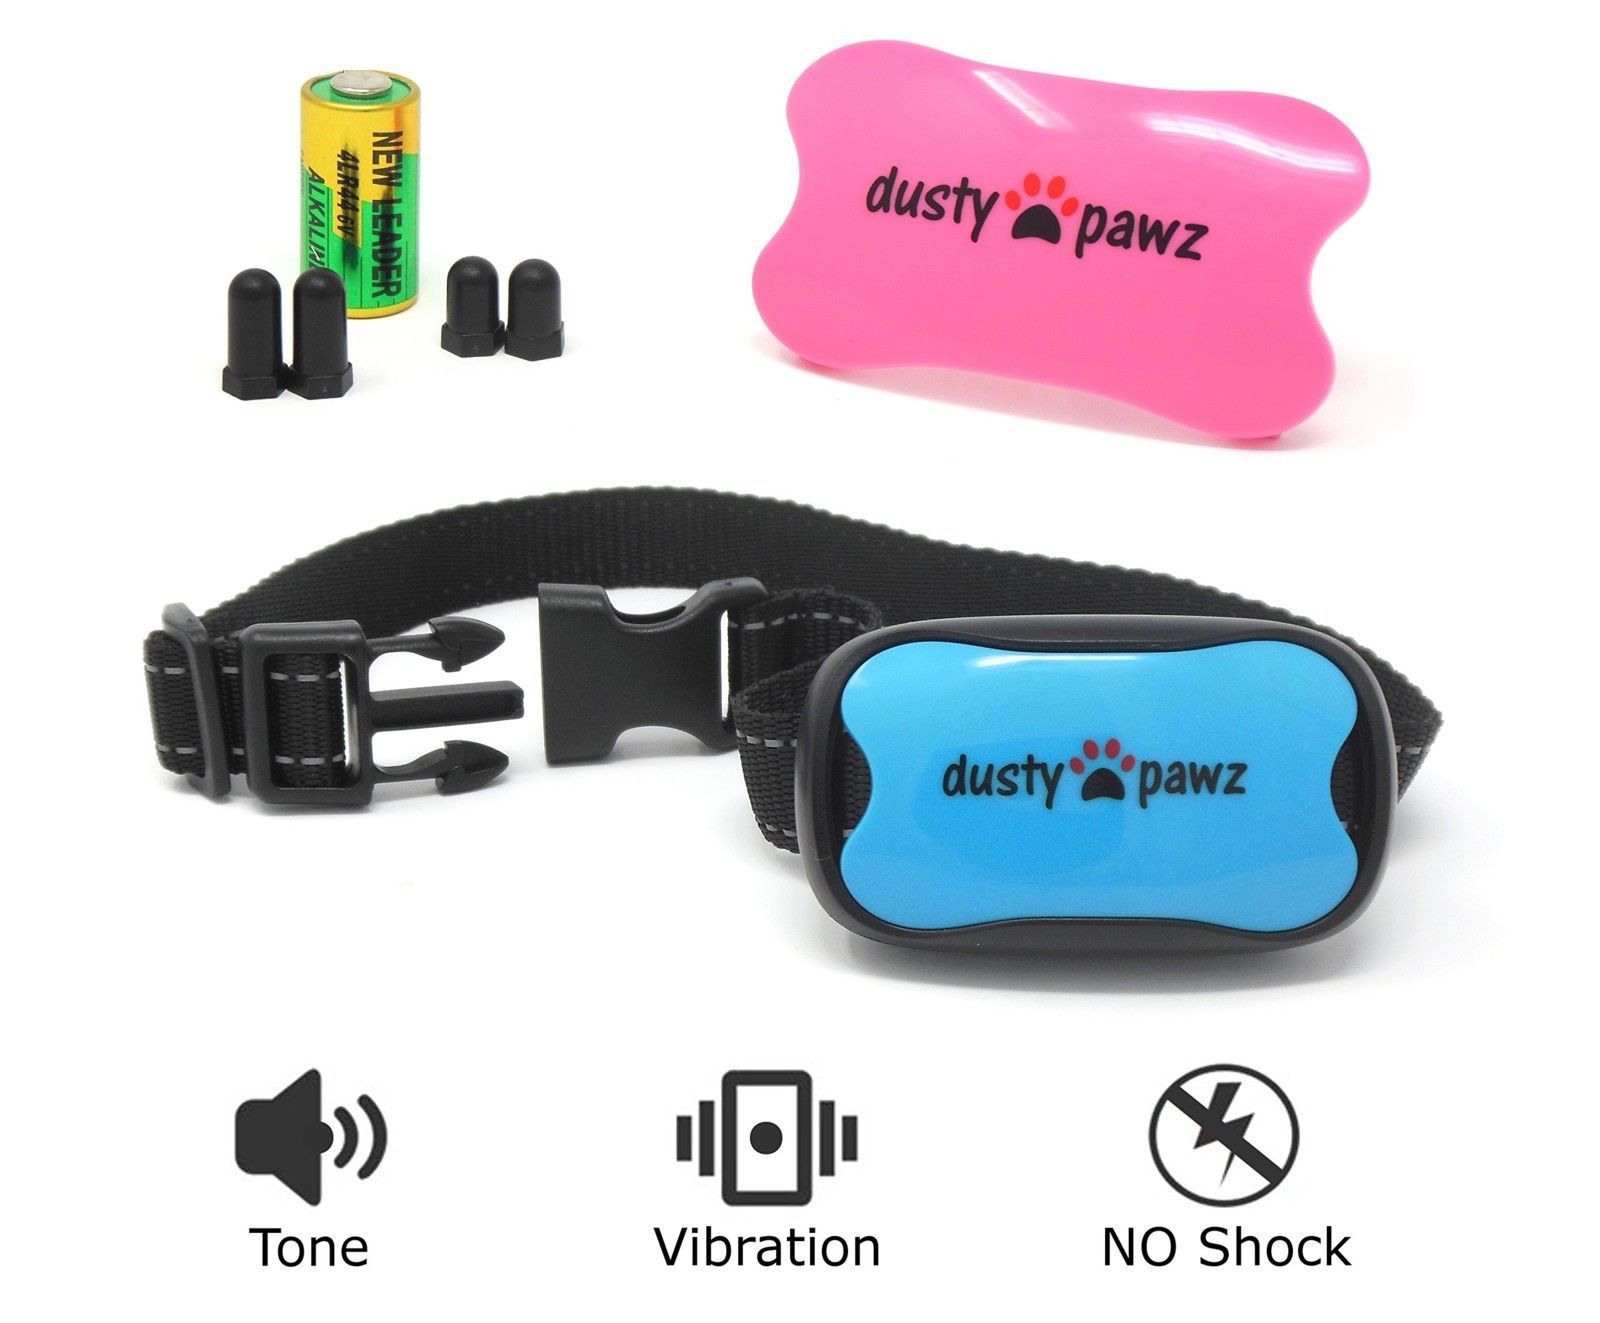 No Shock Bark Collar for Dogs - Bark Training with Sound and Vibration - 7 Sensi